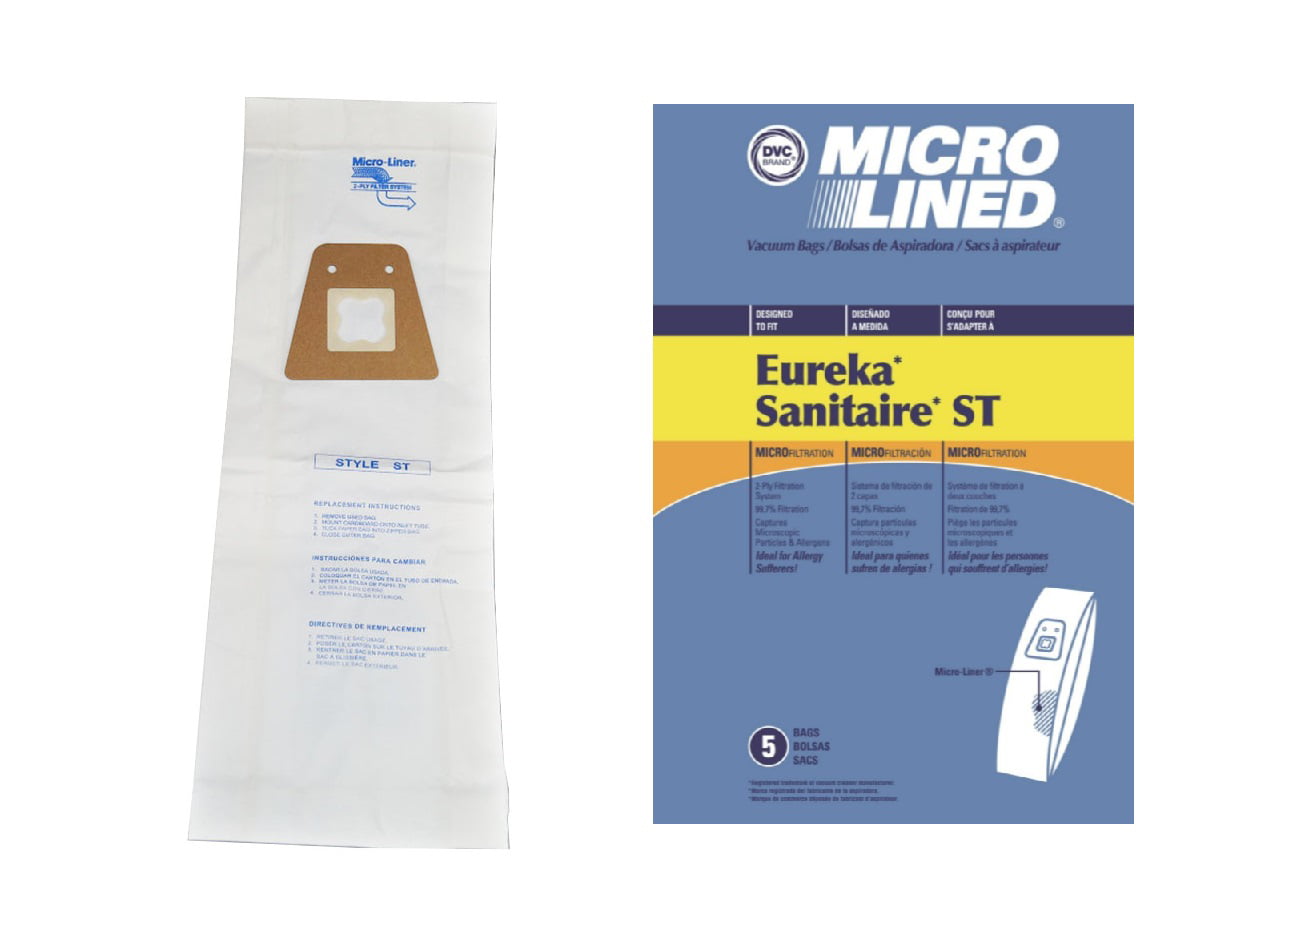 DVC Micro-Lined Vacuum Bags Type A Fit Hoover Convertible, Elite 